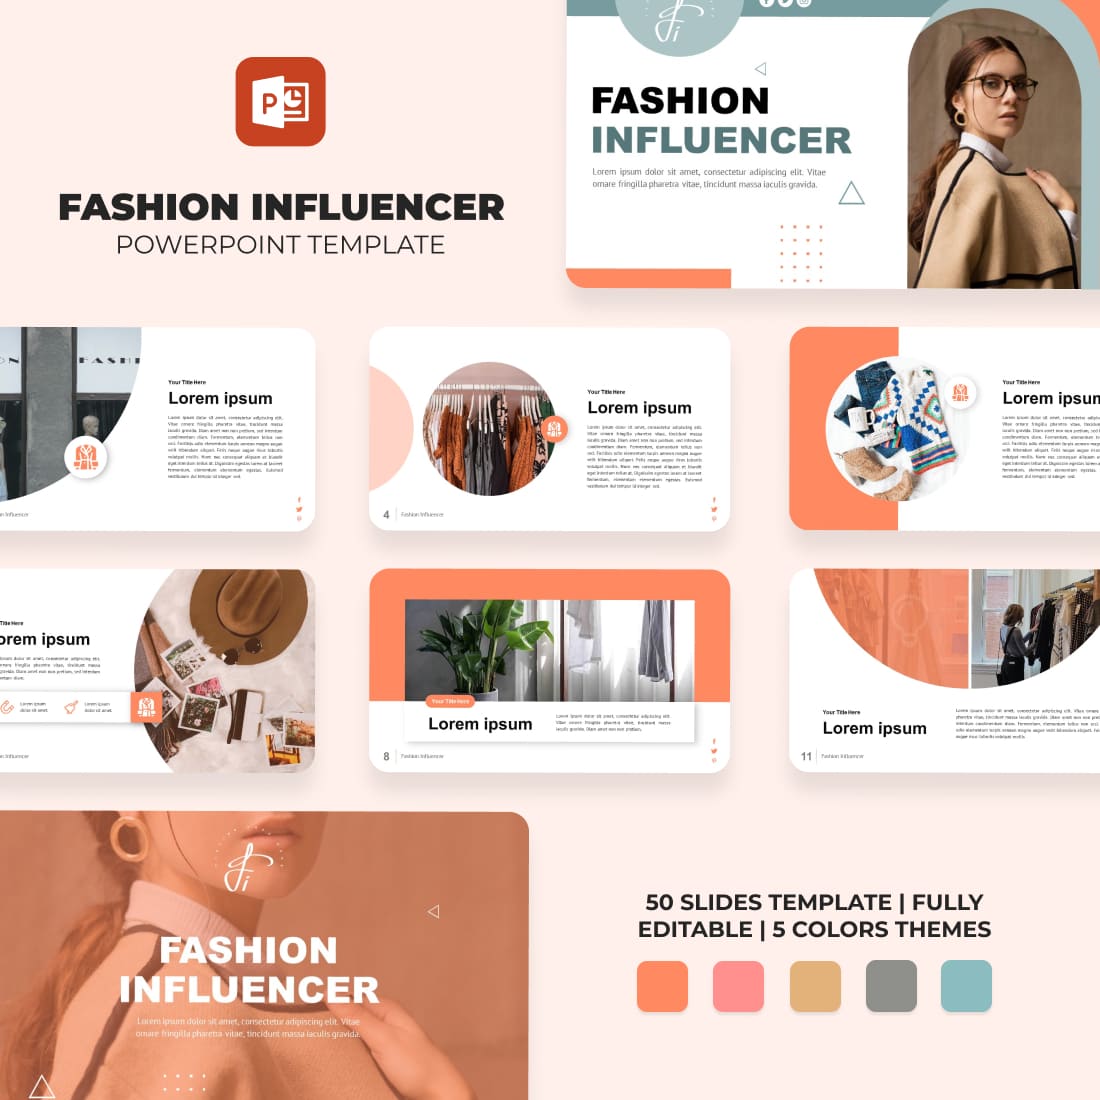 Fashion Influencer Powerpoint Template.